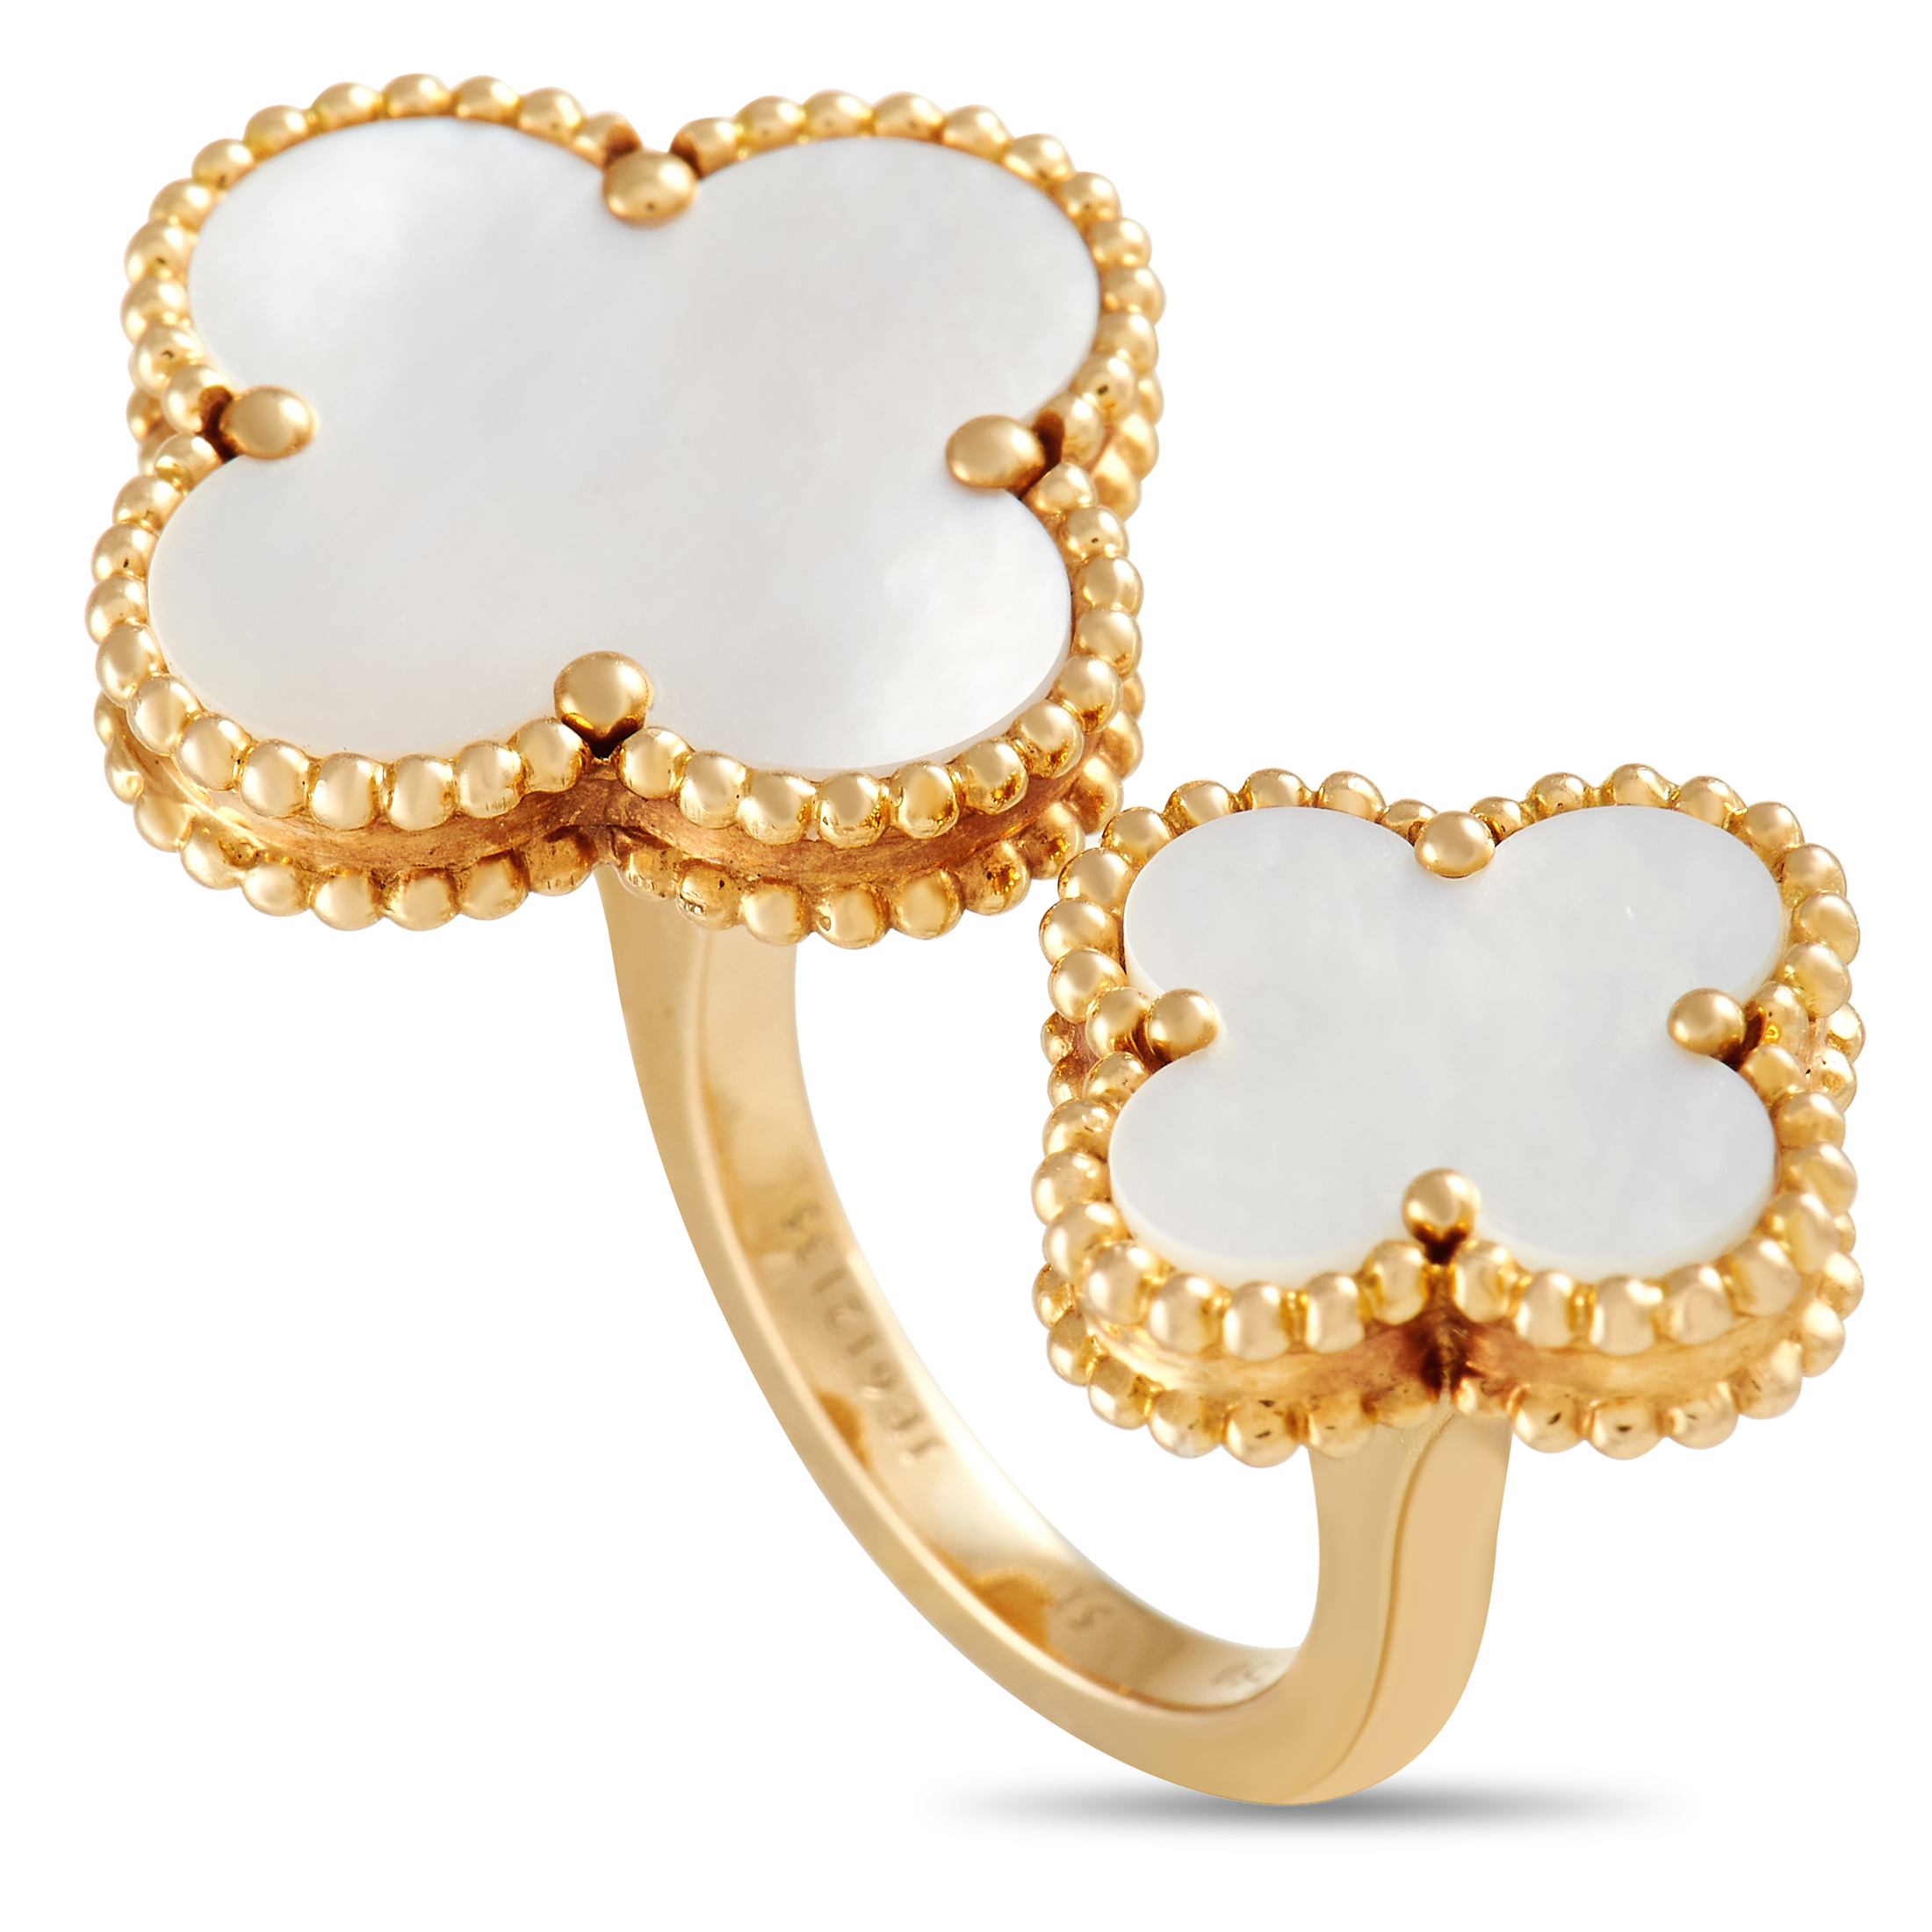 Things You Didn't Know About Van Cleef and Arpels' Alhambra Collection